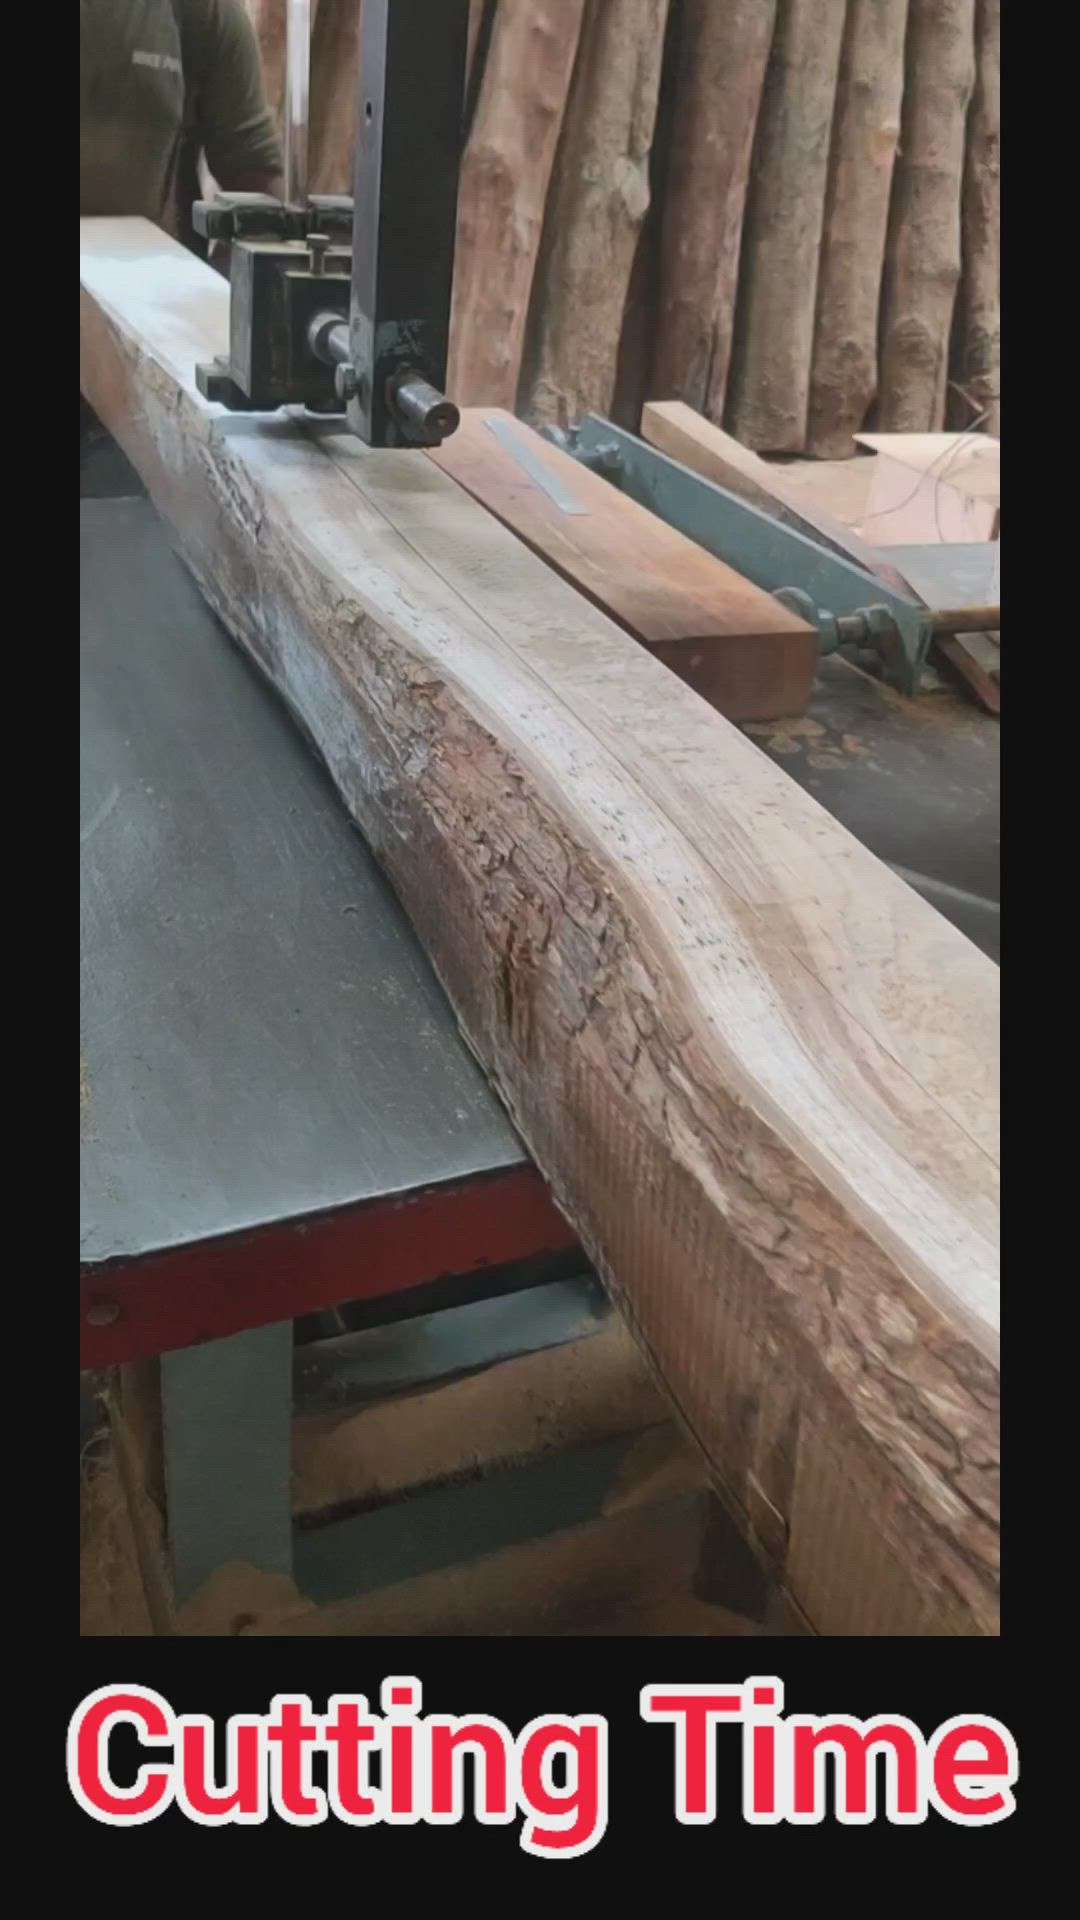 We are cutting logs in nangloi Delhi and we can provide you any size in teakwood, Moulding, margins, corners and tapper also available.

Know more 👉 7065161065 Vipin Thakur #shribhikshutimbers #timber #wood #plantationteakwood #naturalteak #teak #frames #construction #lumber #doors #chukhat #windows #architecture #architect #buildings #cutesizeinteakwood #interiordesigner #interior #kitchen #builder #gurugramcity #dlf #furnitureteakwood #frames #furnituremaker #India #Delhi #delhincr #Indianwood #ivorycoastteak #sudanteak #cpnagpurteak #Africa #Africateakwood #doors #windows #frames #material #contractors